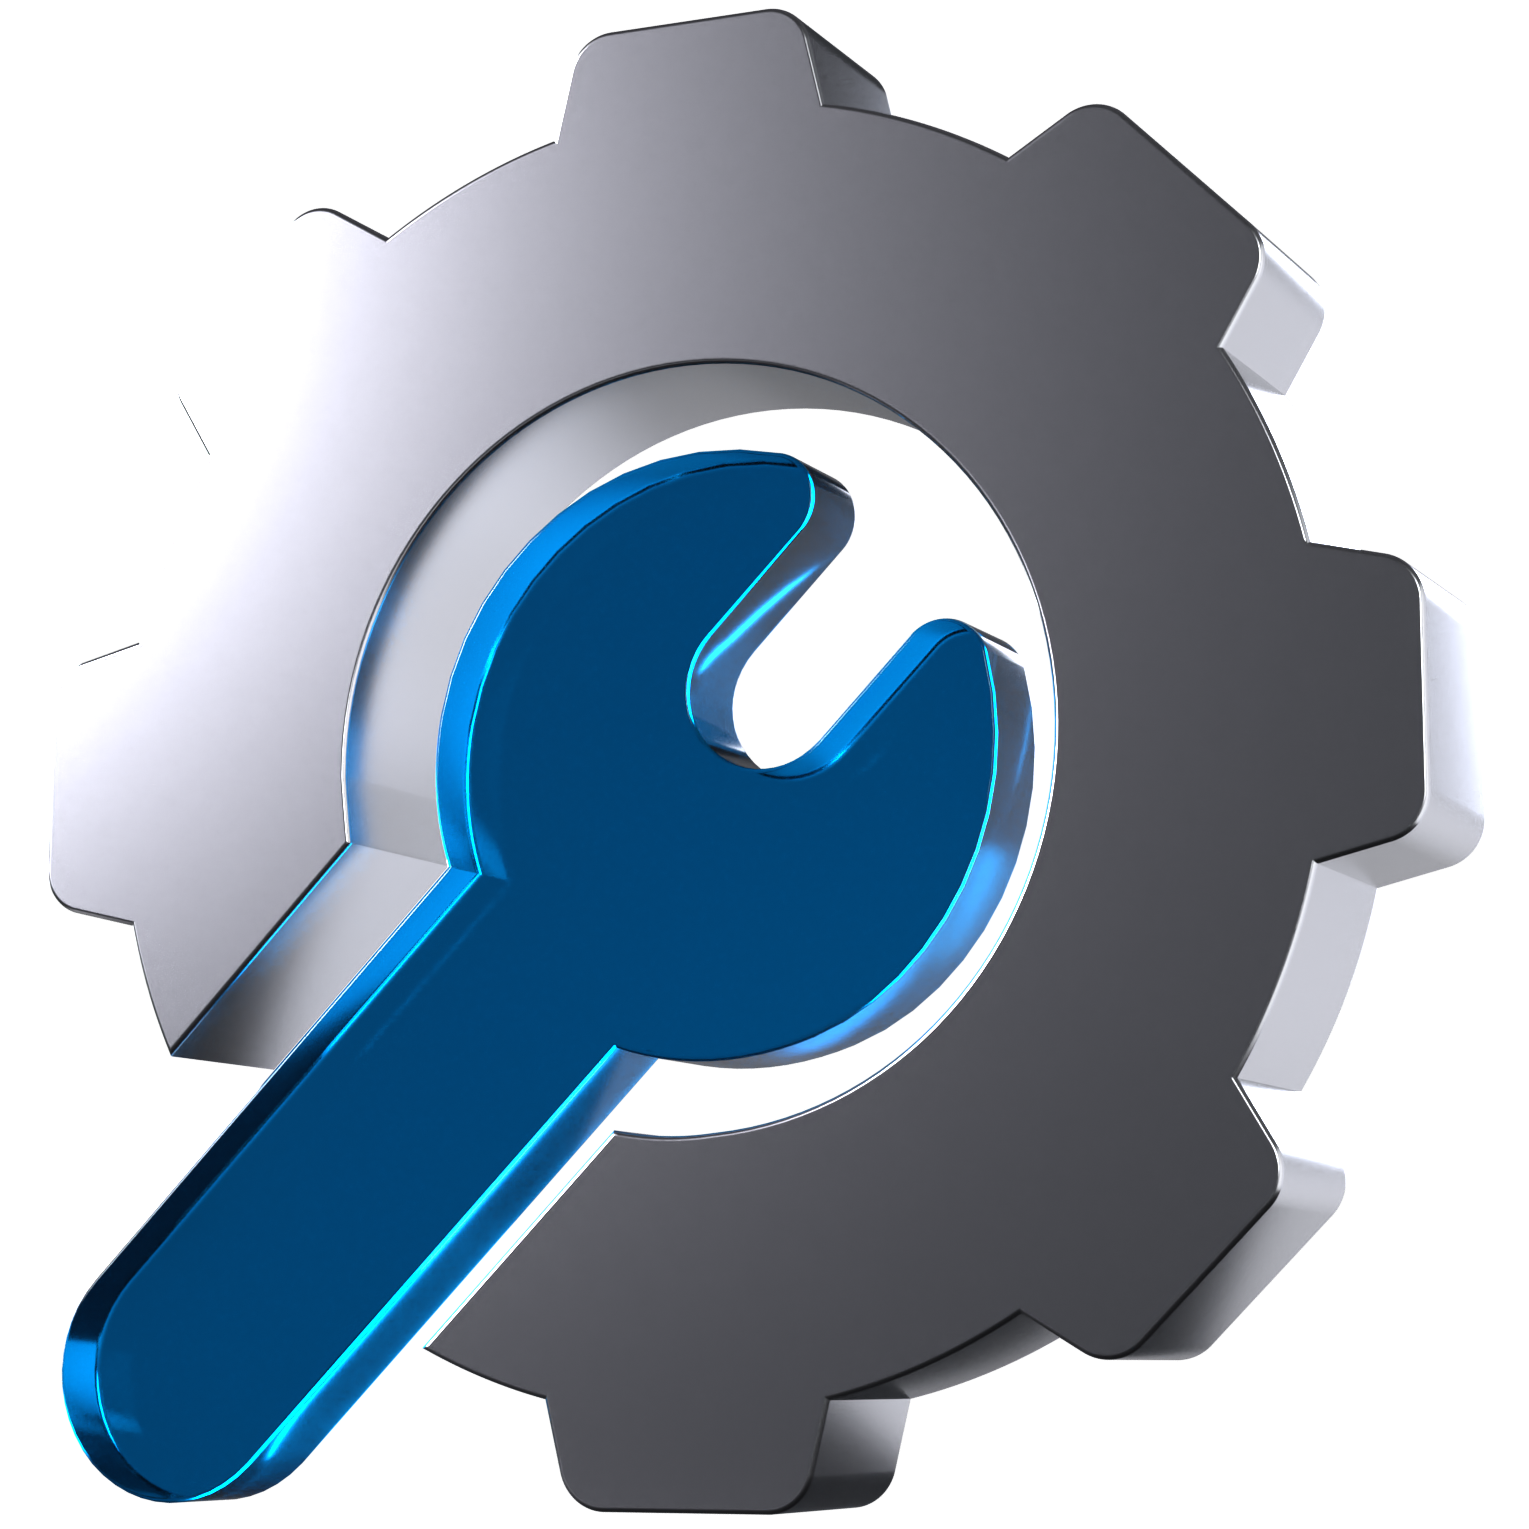 A 3D icon of a gear with a wrench in the middle